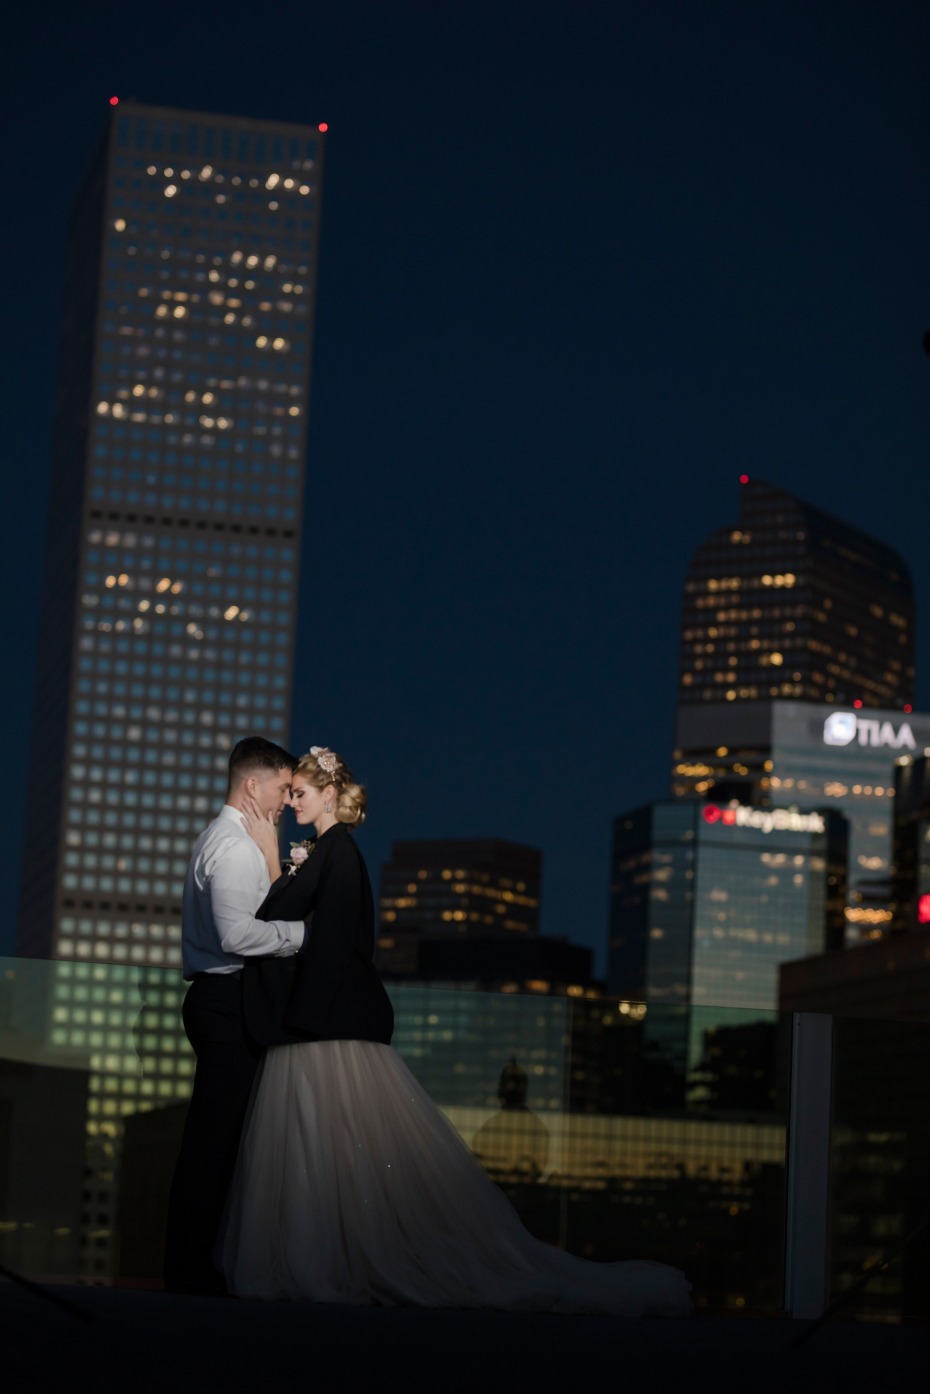 sweet bride and groom photos on the rooftop